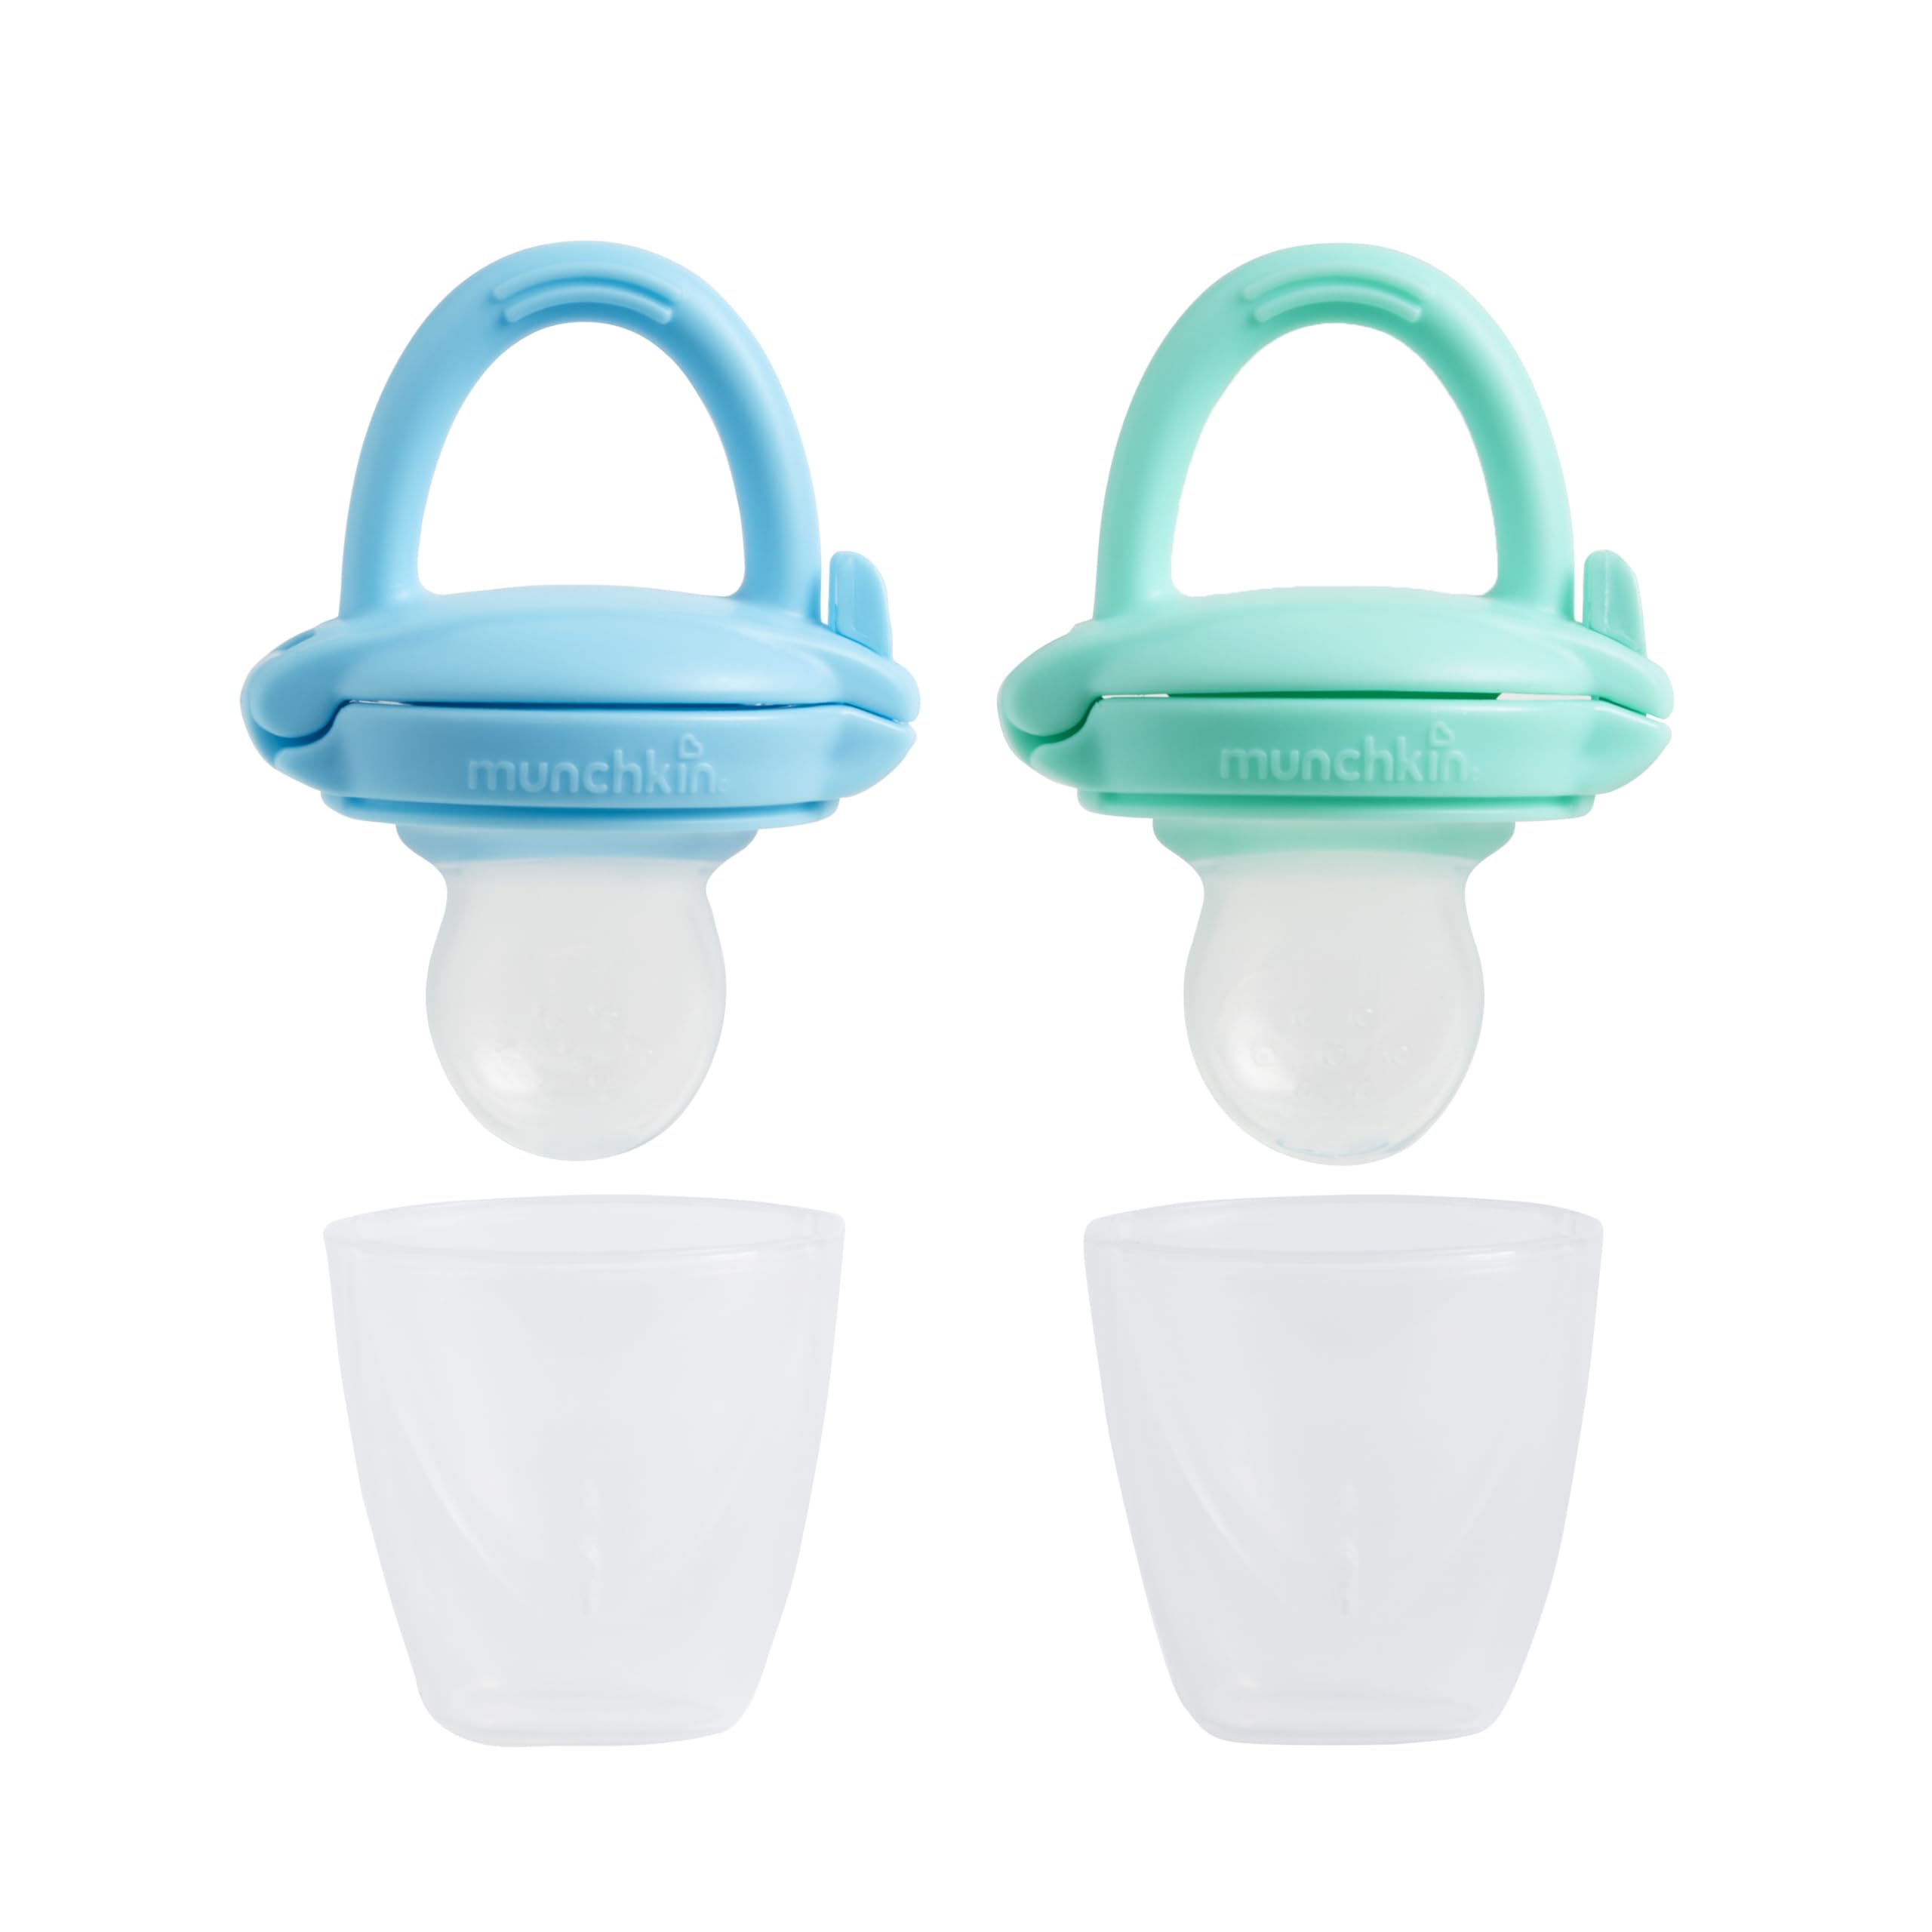 Munchkin® Silicone Baby Food Feeder for Solids and Purees, Great for Self-Feeding and Baby Led Weaning, 2 Pack, Blue/Mint